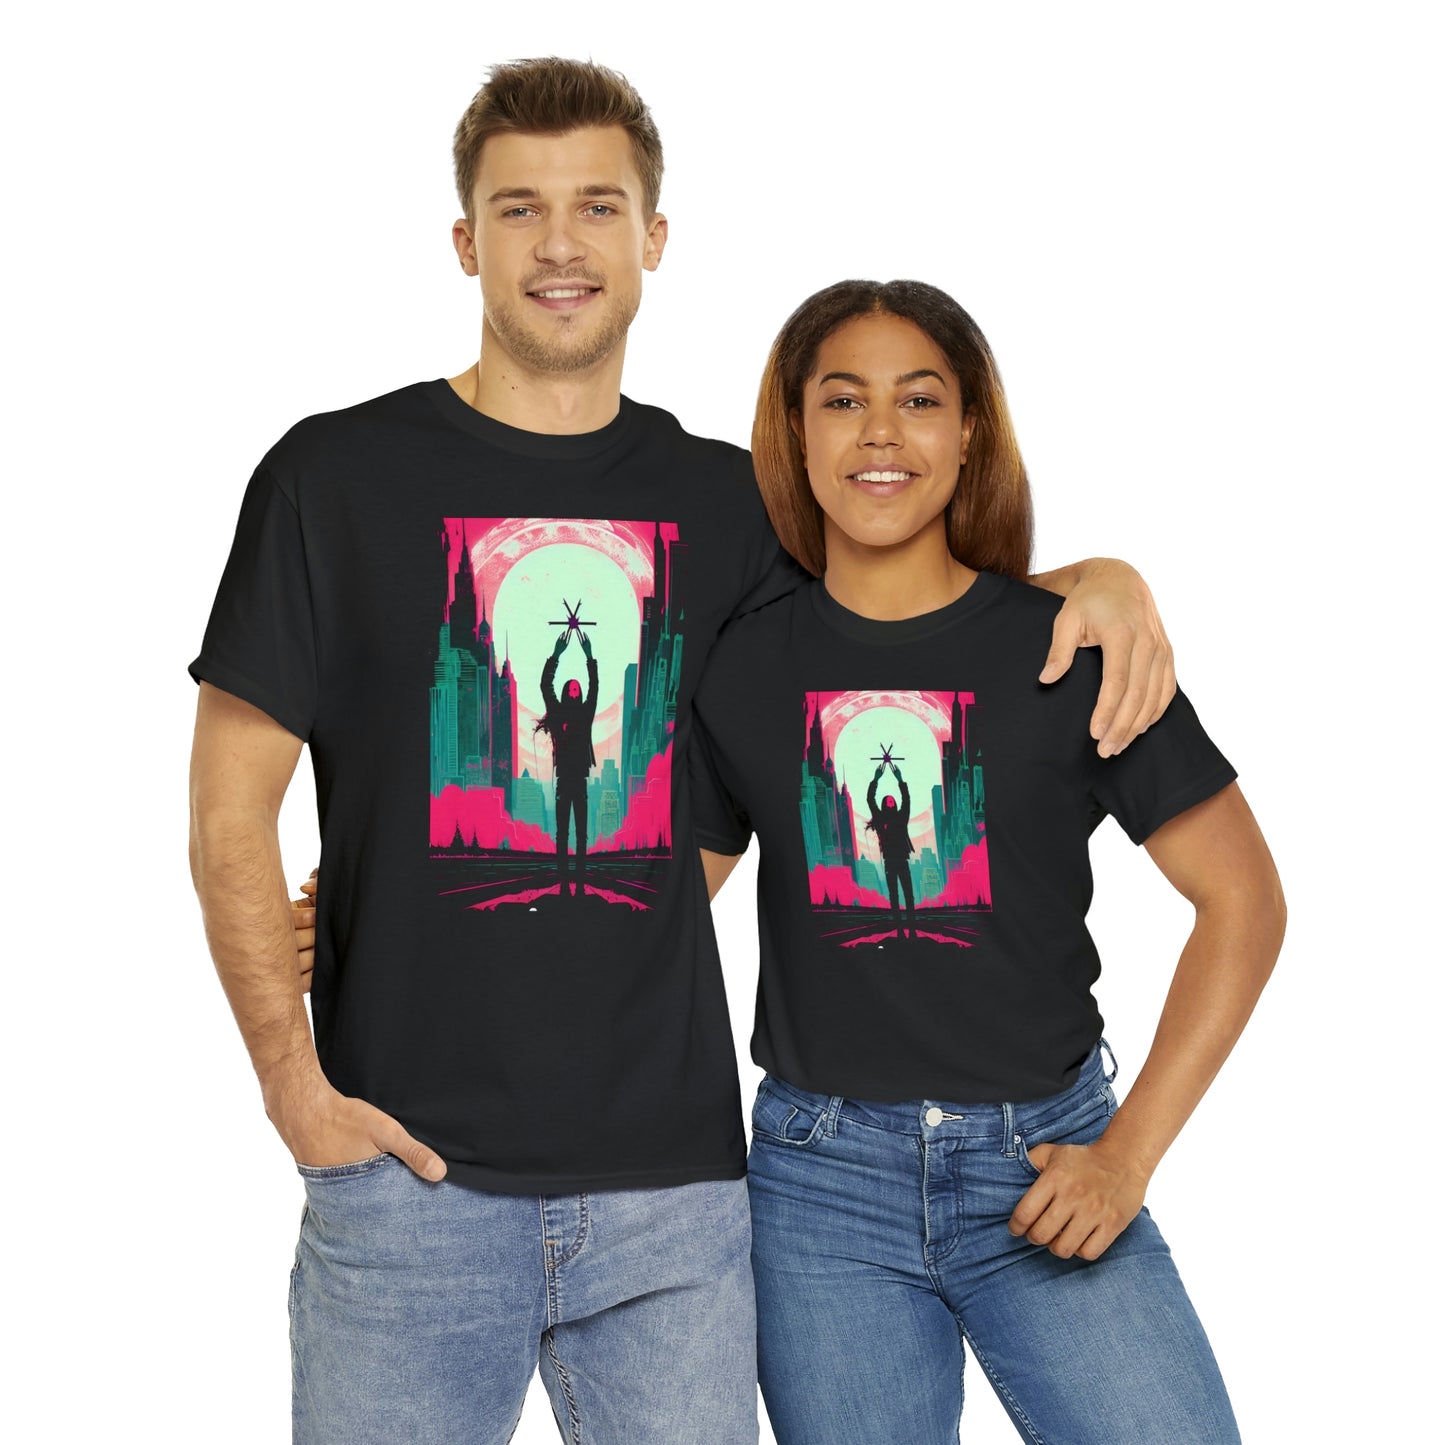 Couple wearing black Last Hands Raised tee embracing each other.